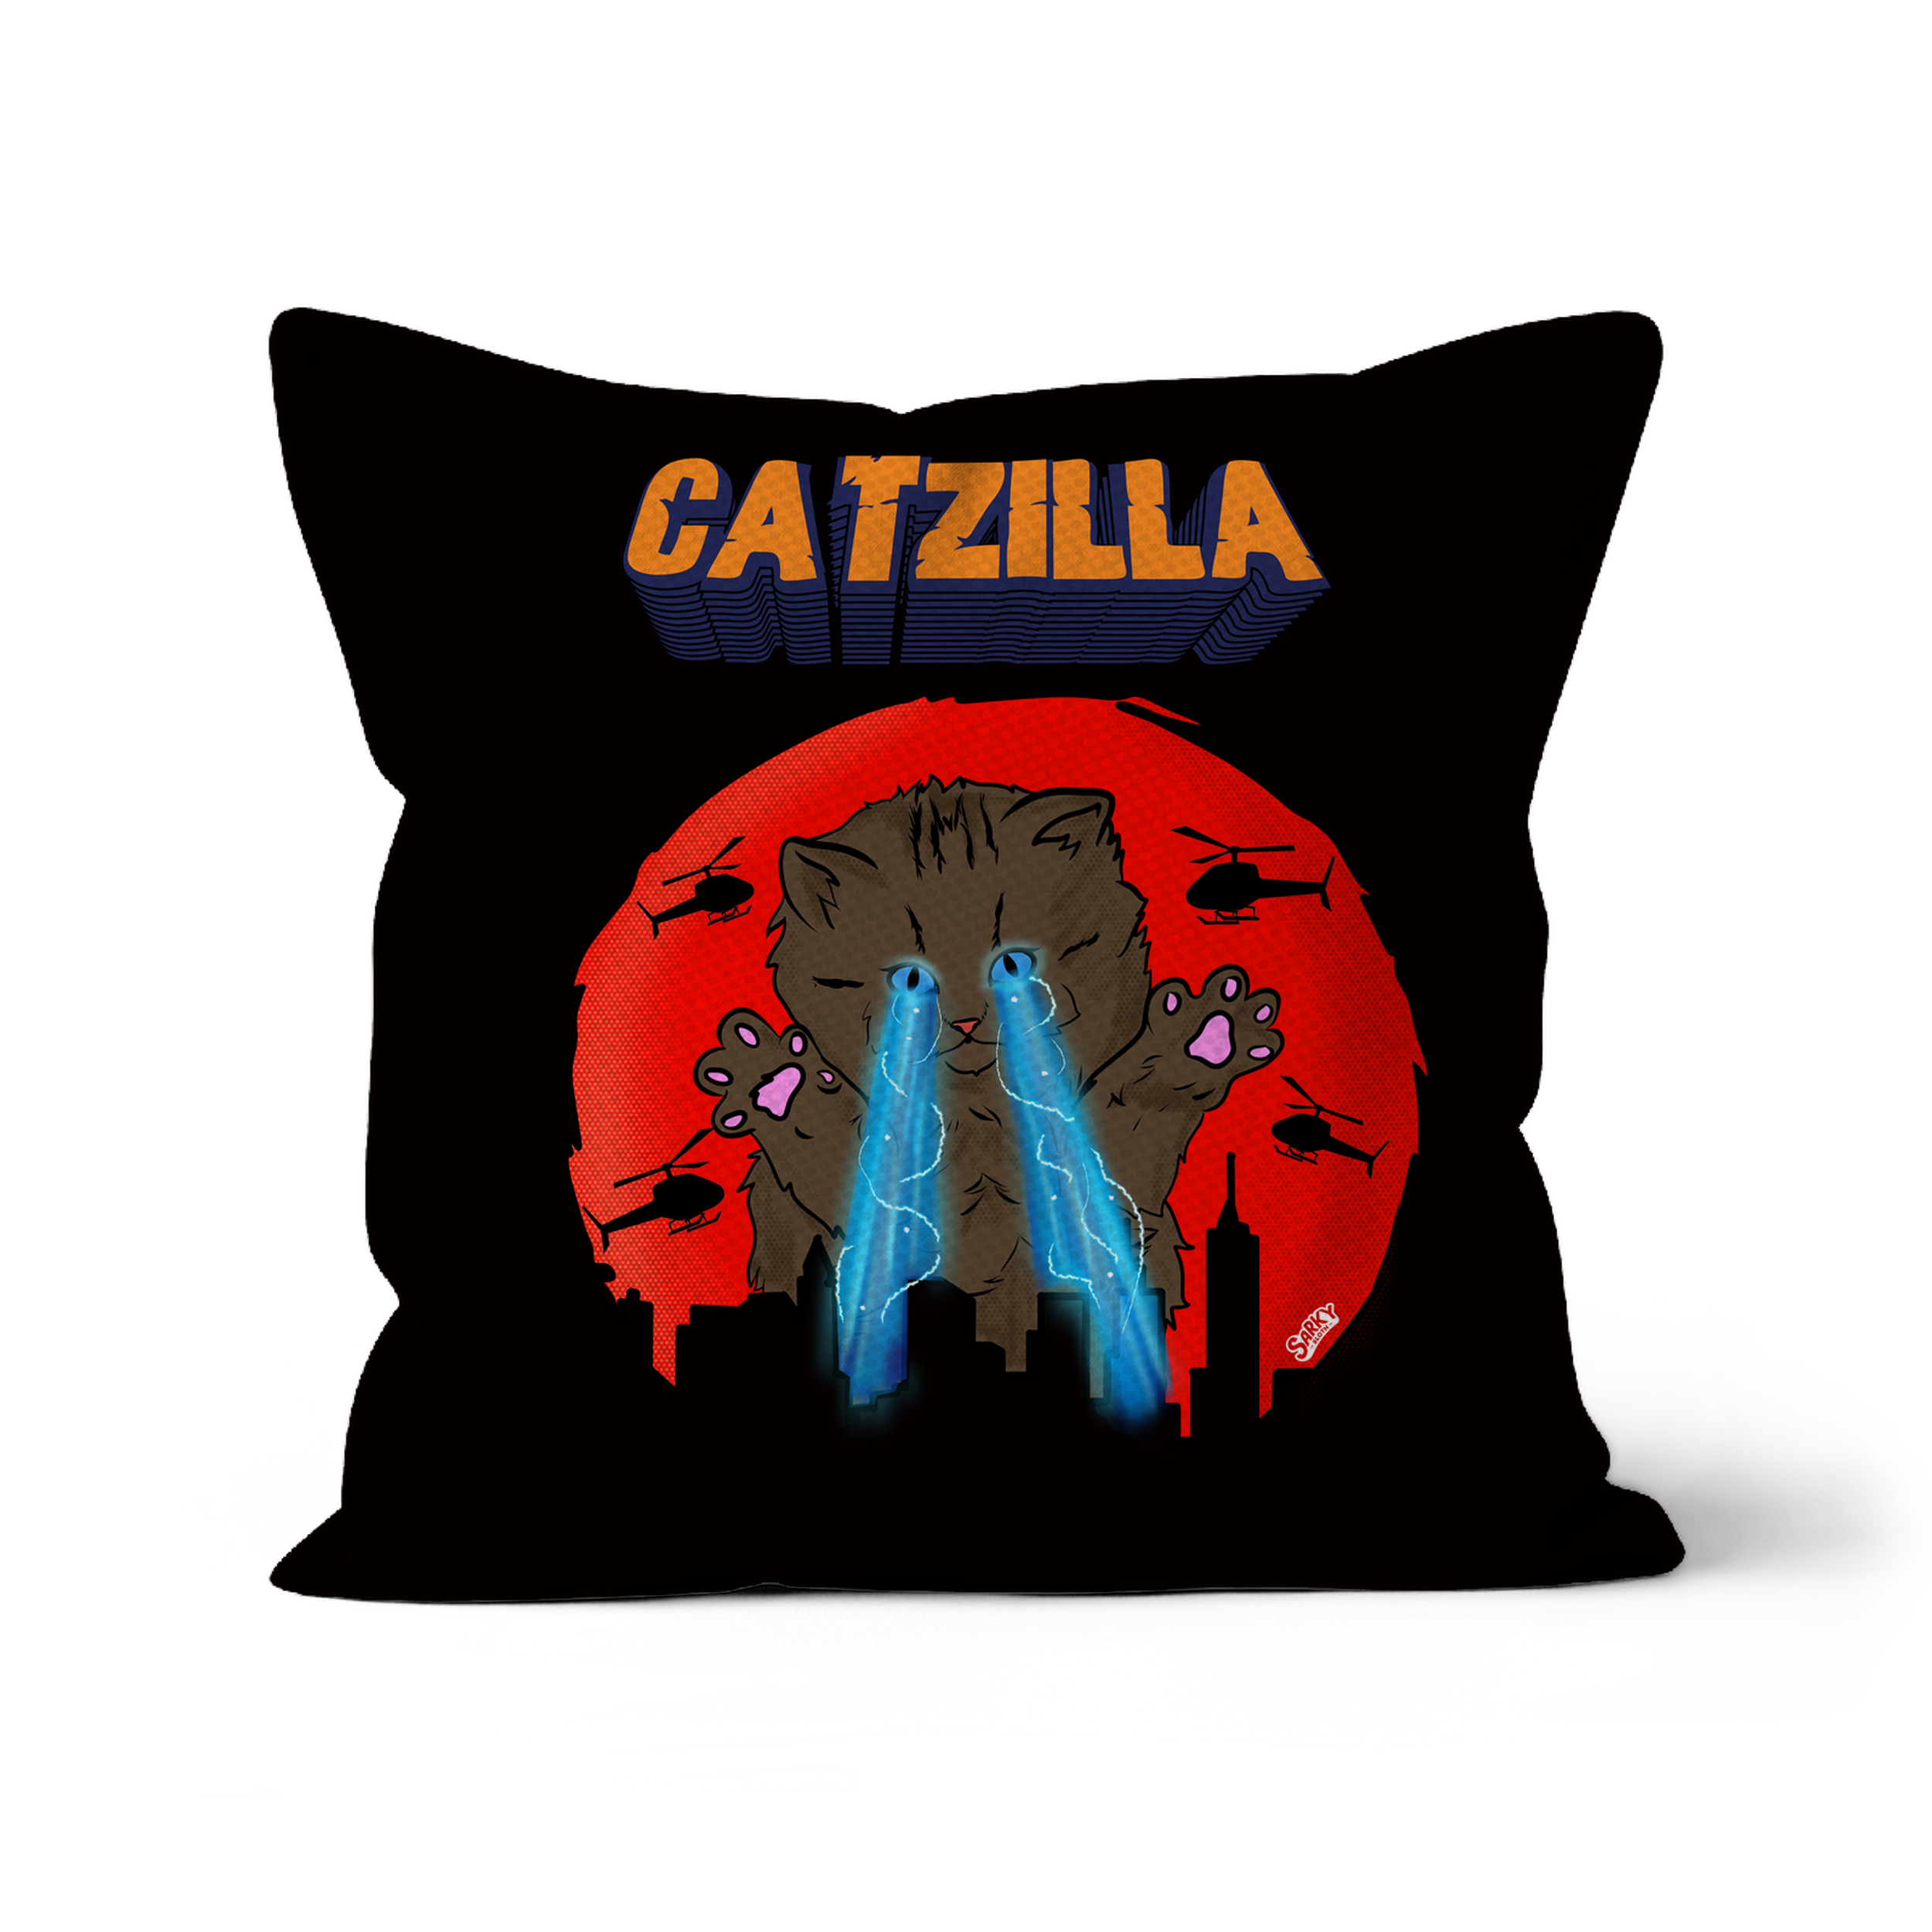 black and white cushions, cushion covers for sofas, cushions black white, cushion covers uk, white cushions, Graphic tees, sarkysloth, sarky sloth